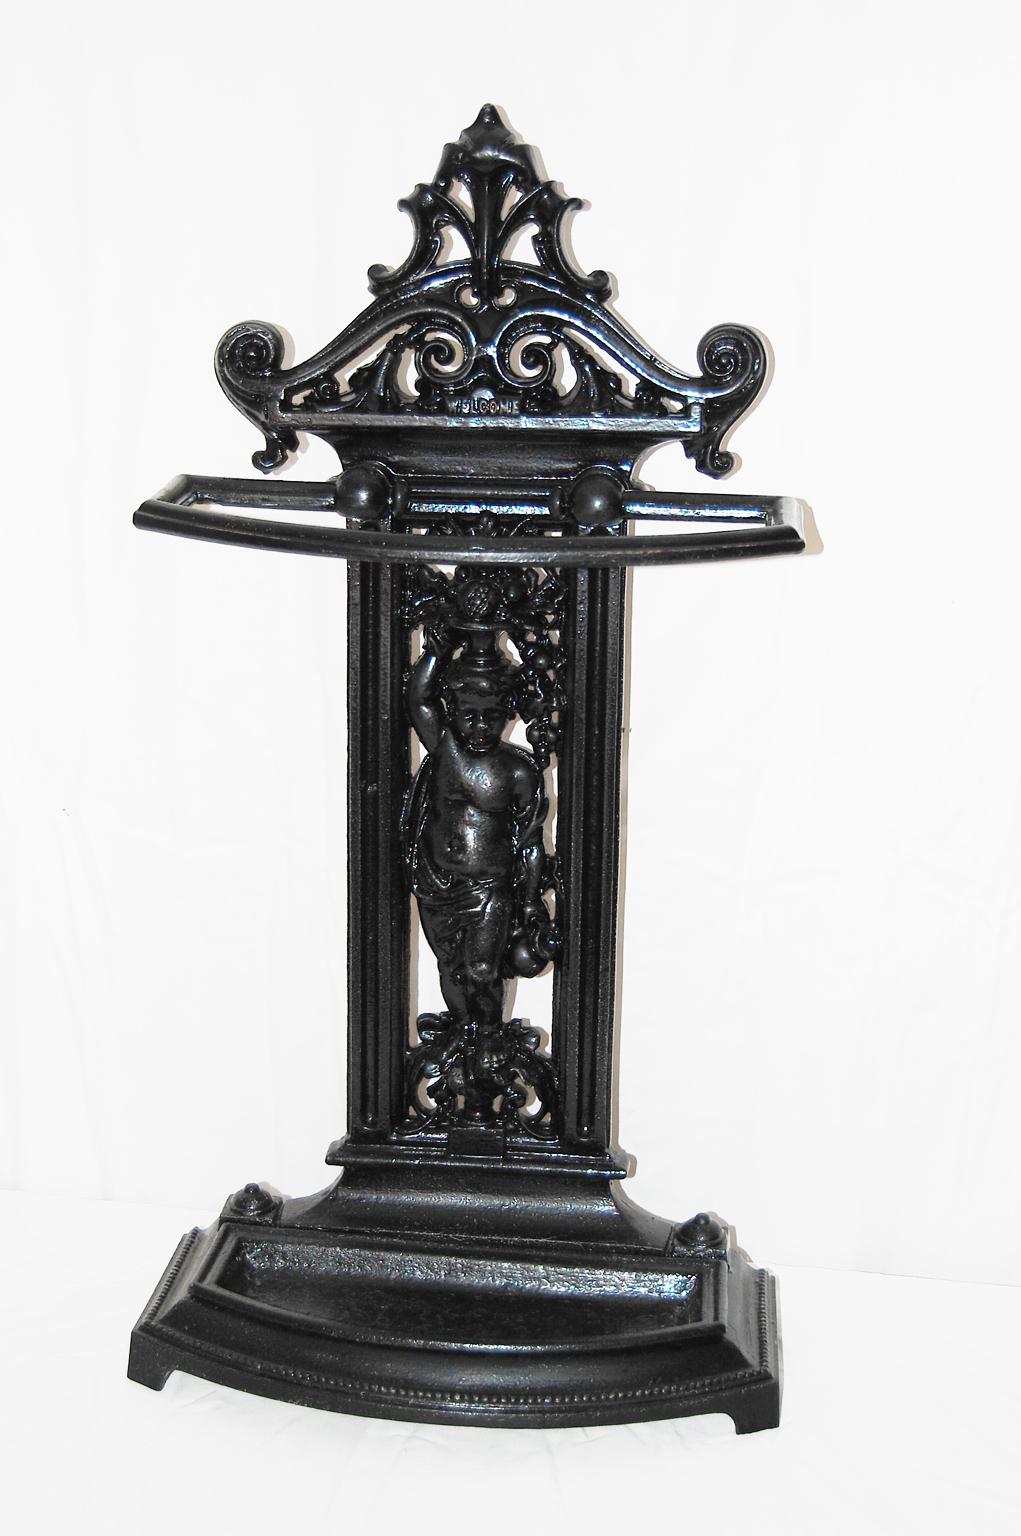 English cast iron Victorian umbrella/stick stand. This stand has a young boy carrying an urn with fruit and flowers on his head as the main decorative motif. The drip pan in the base is removable so it can easily be cleaned. There is a registry date